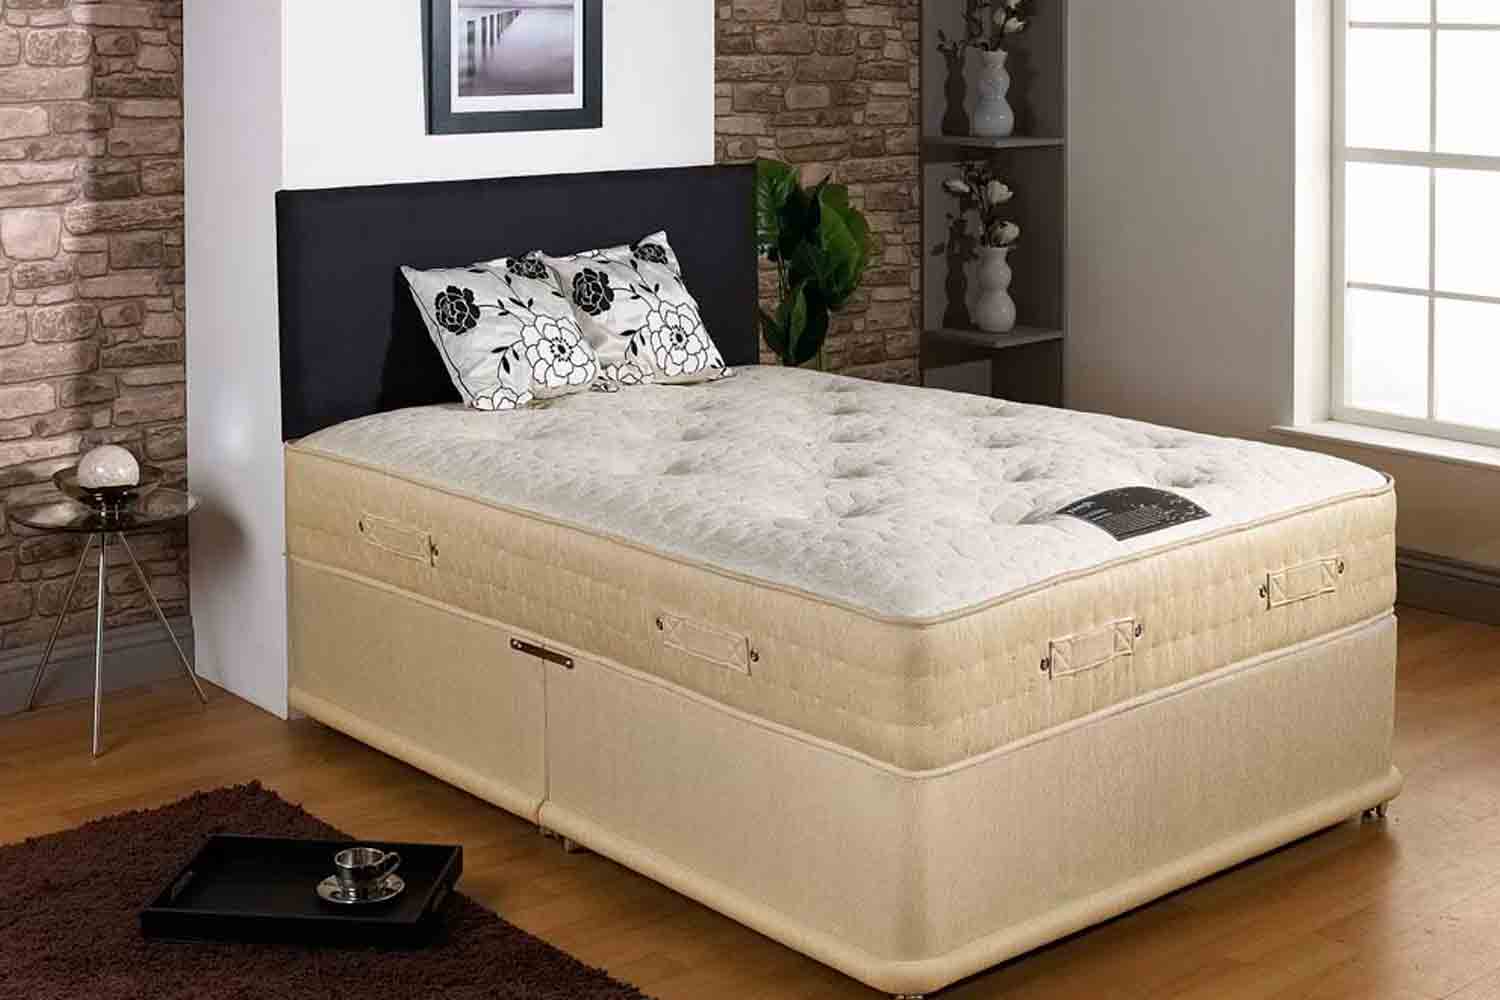 Joseph Bubbles 2000 Pocket Sprung Memory Divan Bed-Super King Size-2 Drawers Either Side